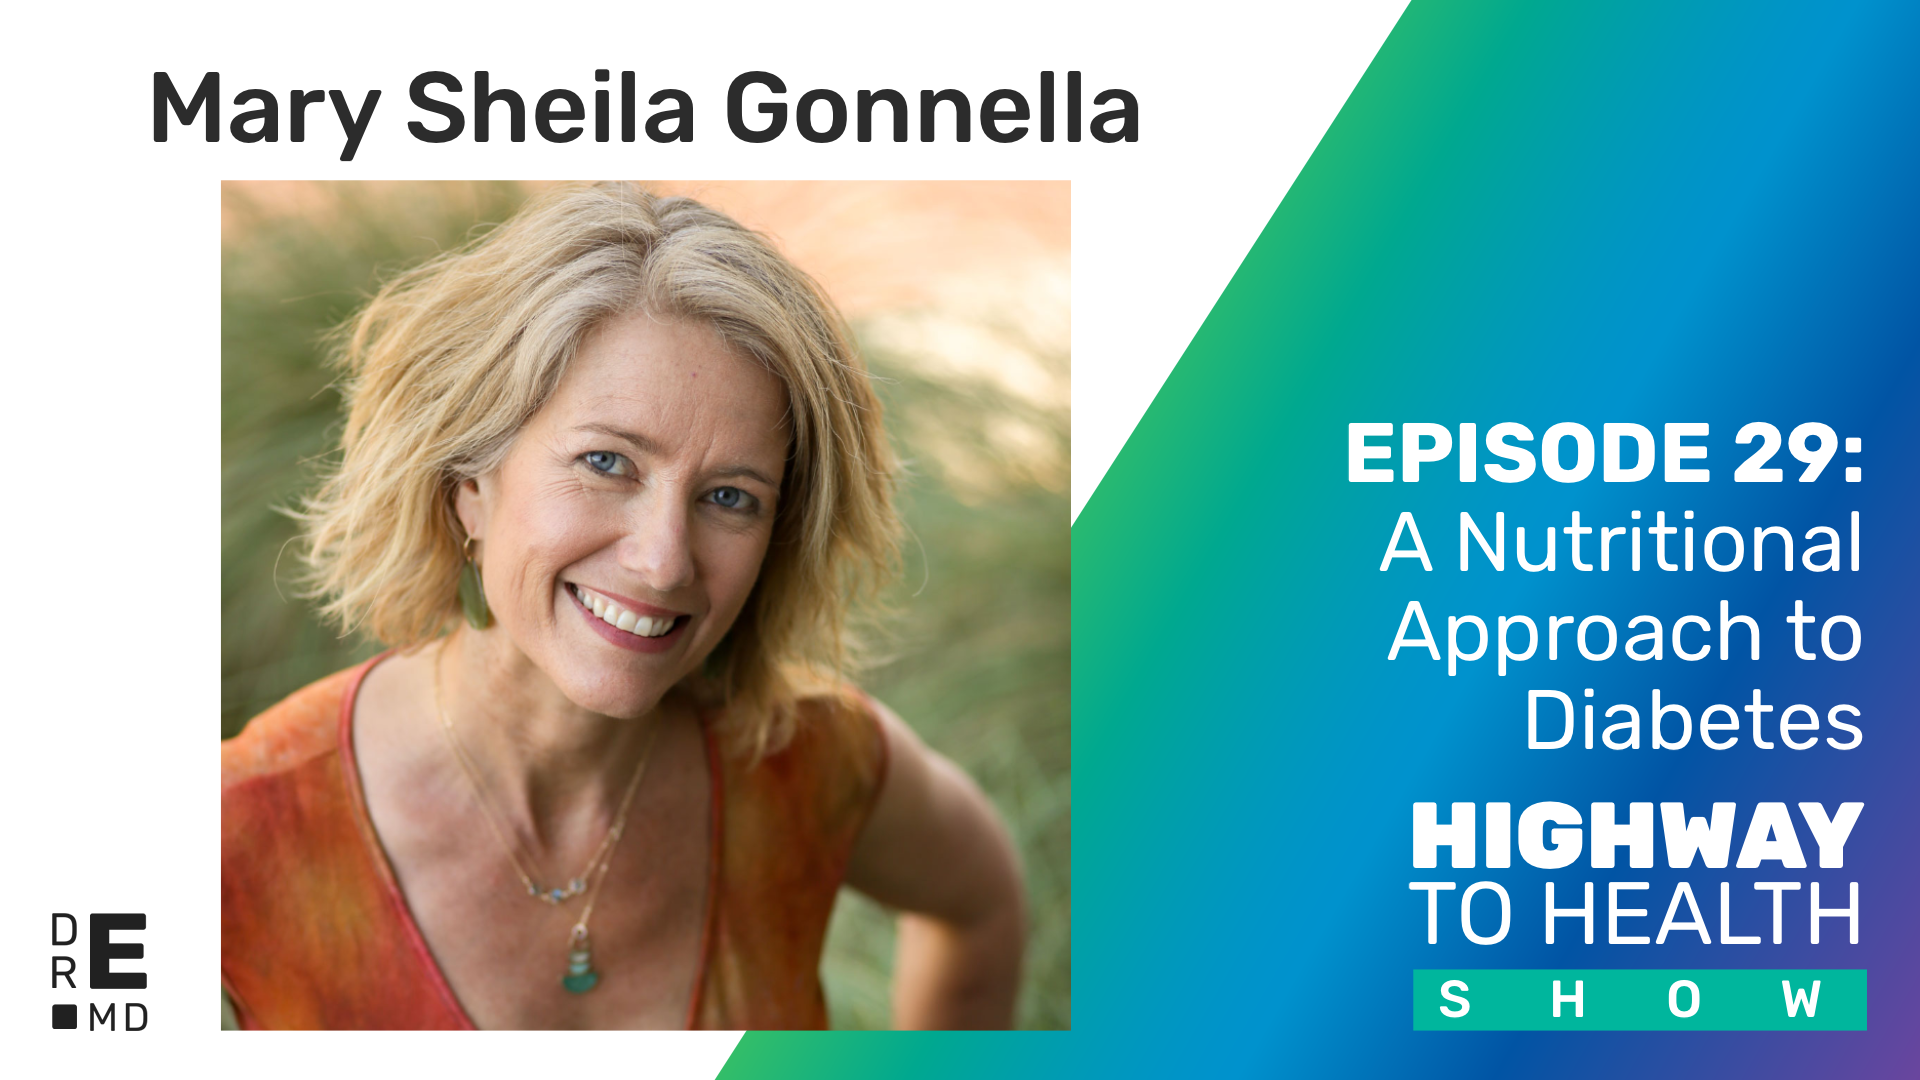 Highway to Health: Ep 29 - Mary Sheila Gonnella